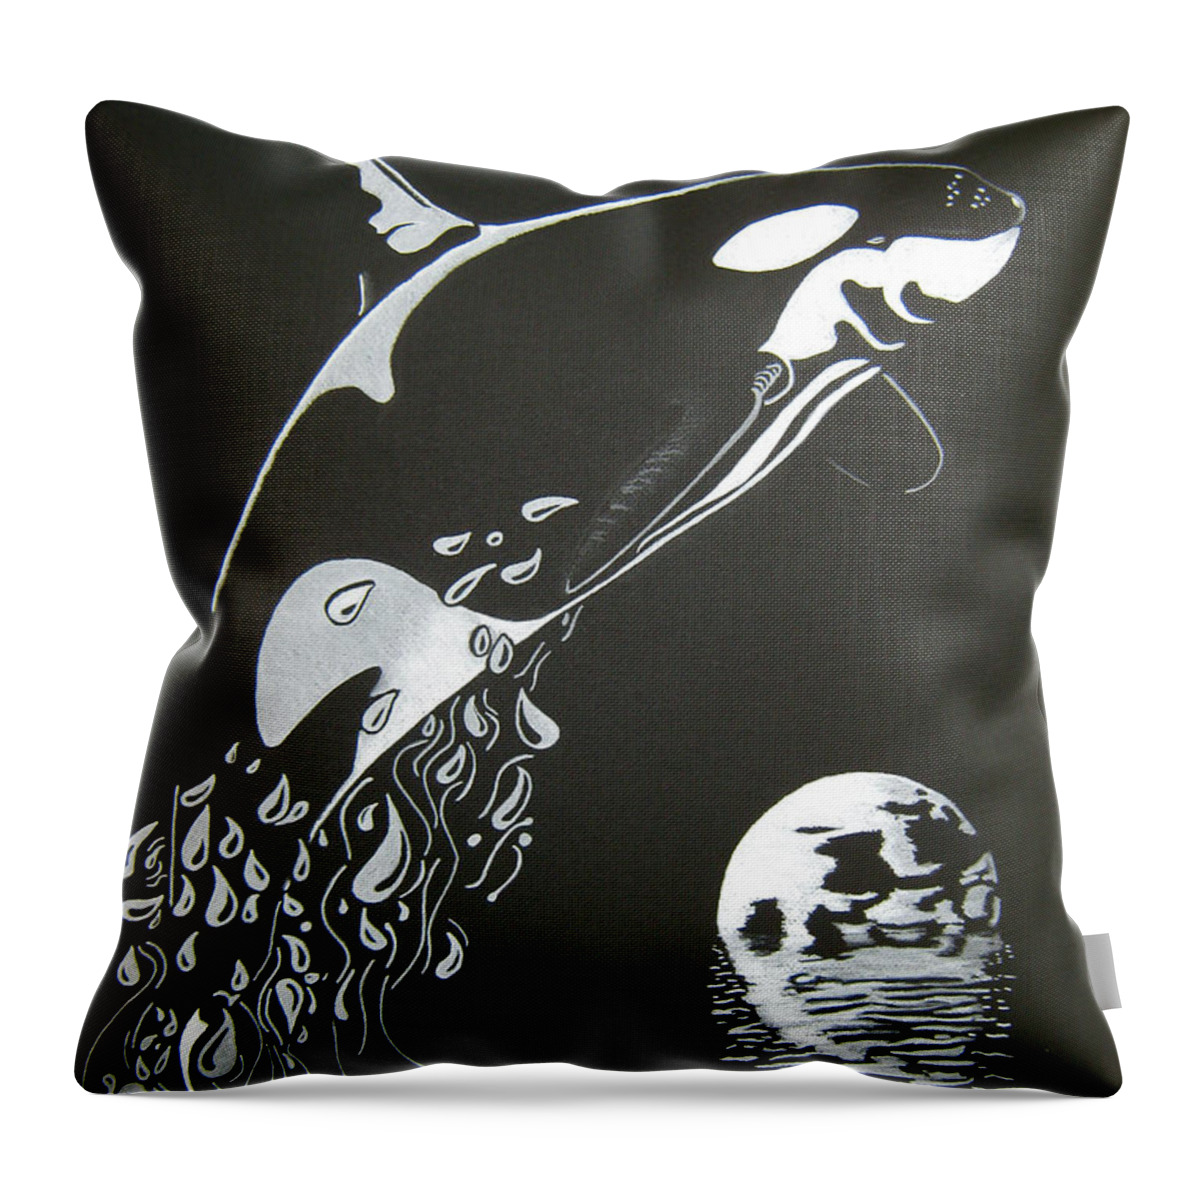  Whale Digital Art Throw Pillow featuring the drawing Orca Sillhouette by Mayhem Mediums